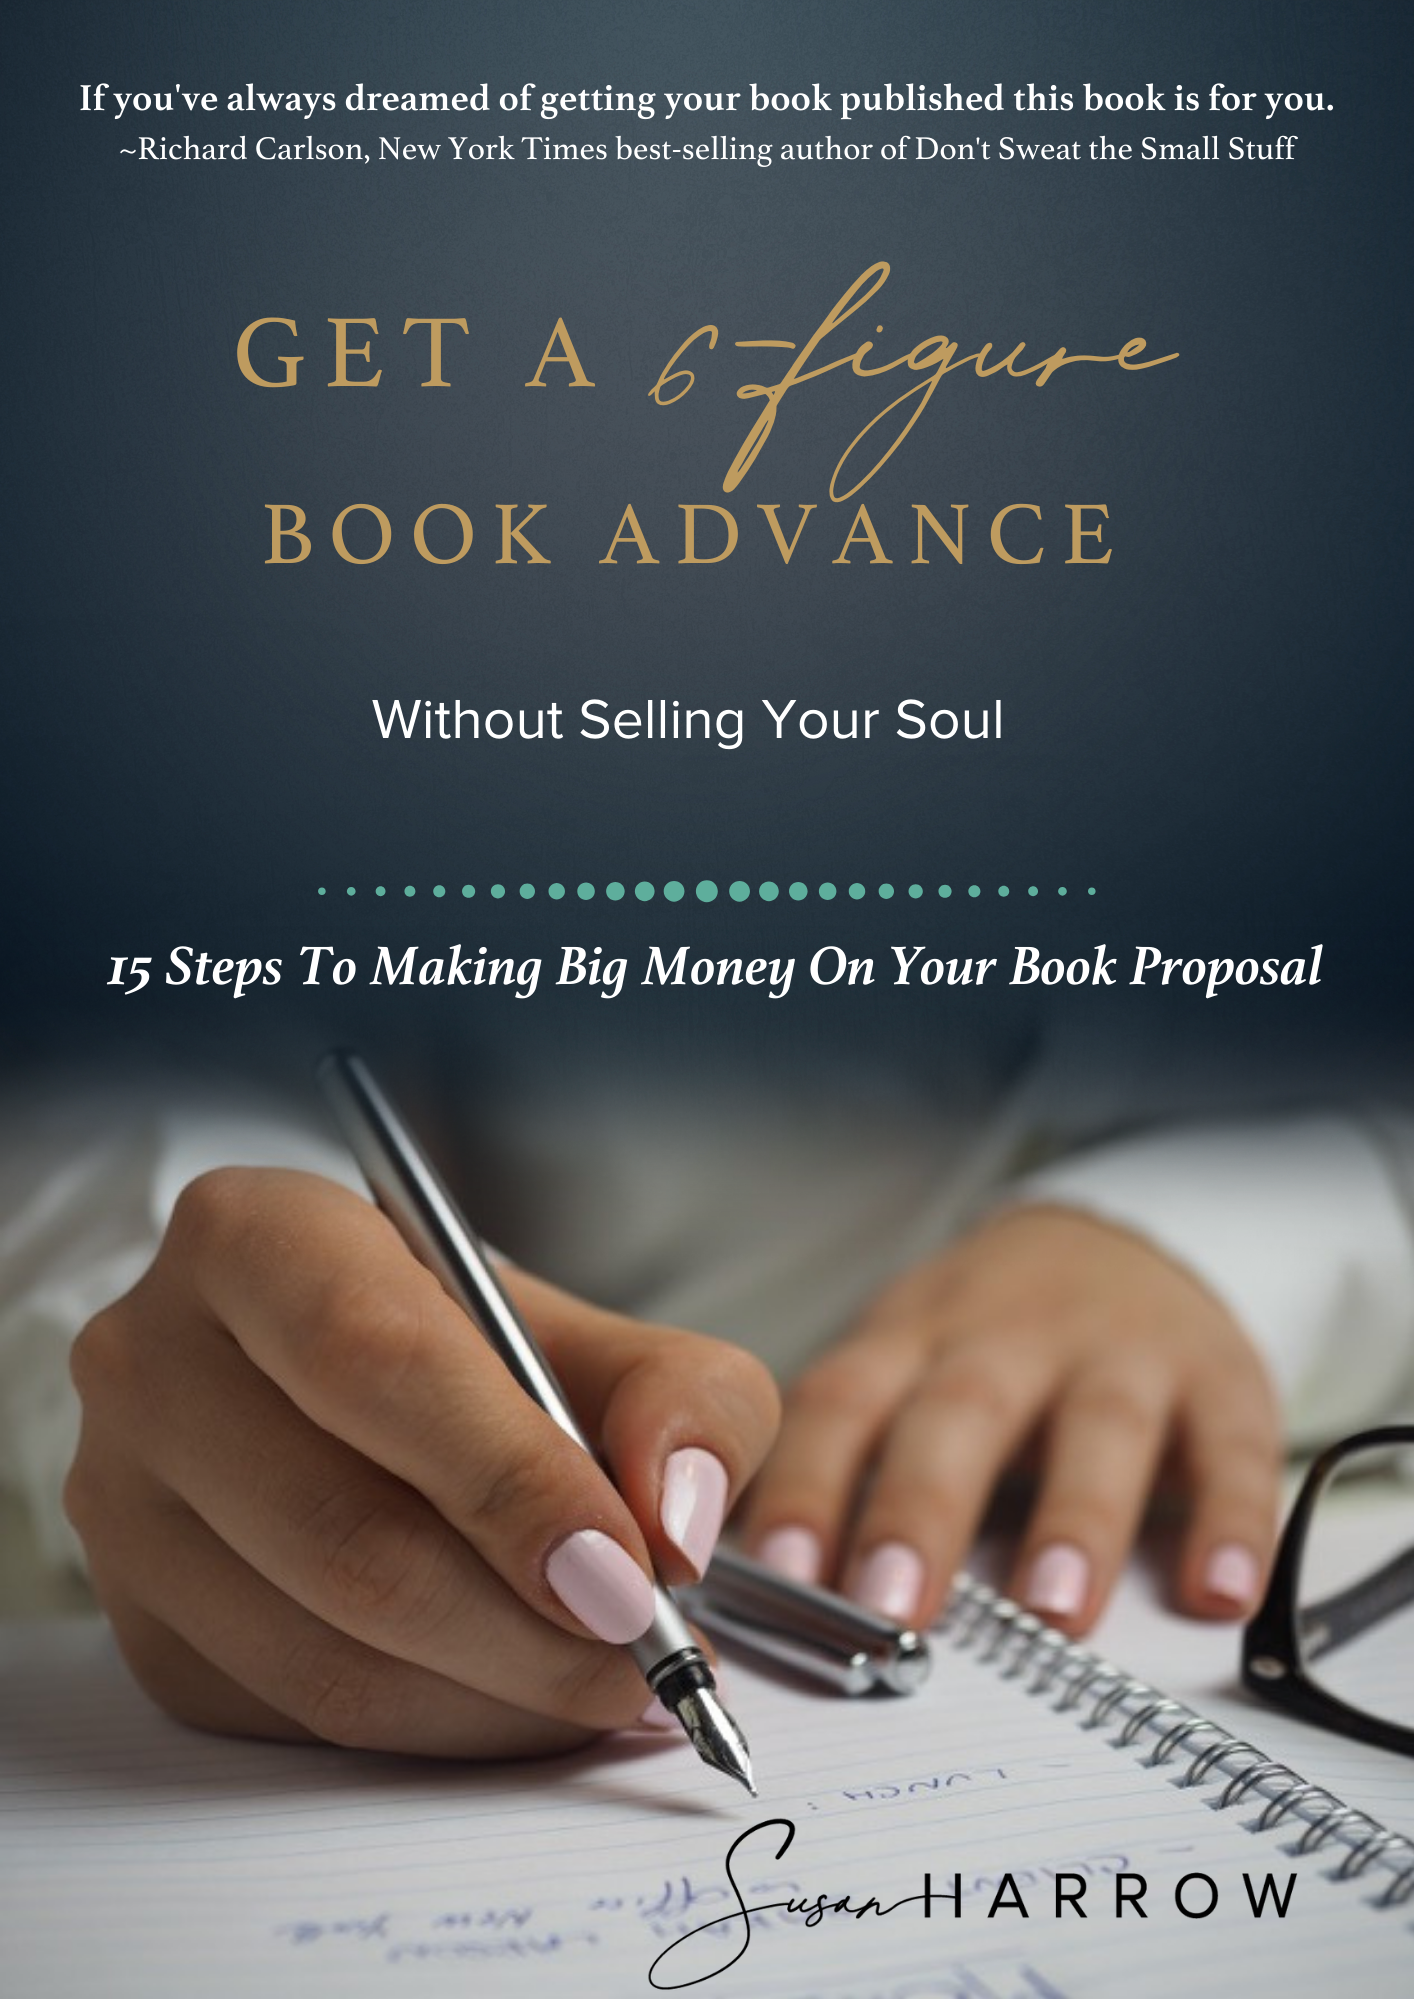 How To Get A Six Figure Book Advance